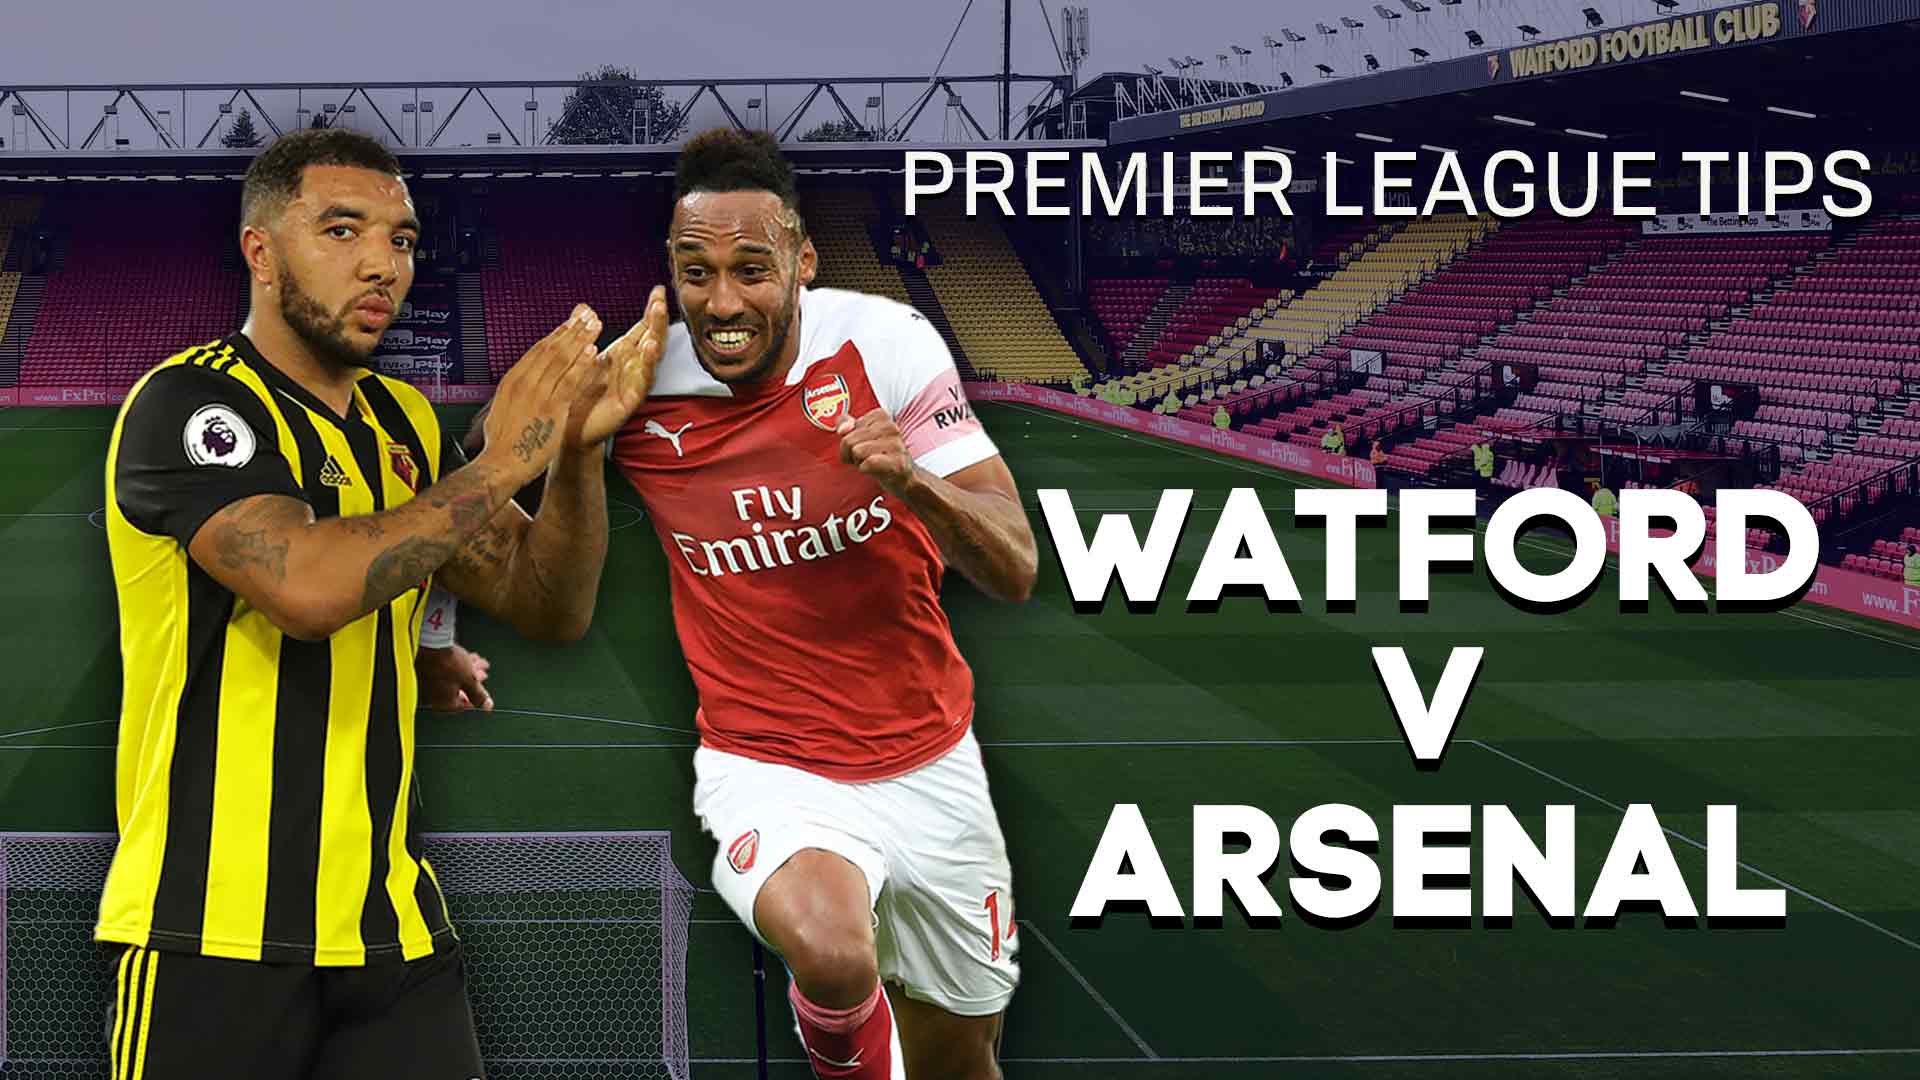 Watford v Arsenal betting preview Free Premier League tips, prediction, best bets and latest odds for game at Vicarage Road